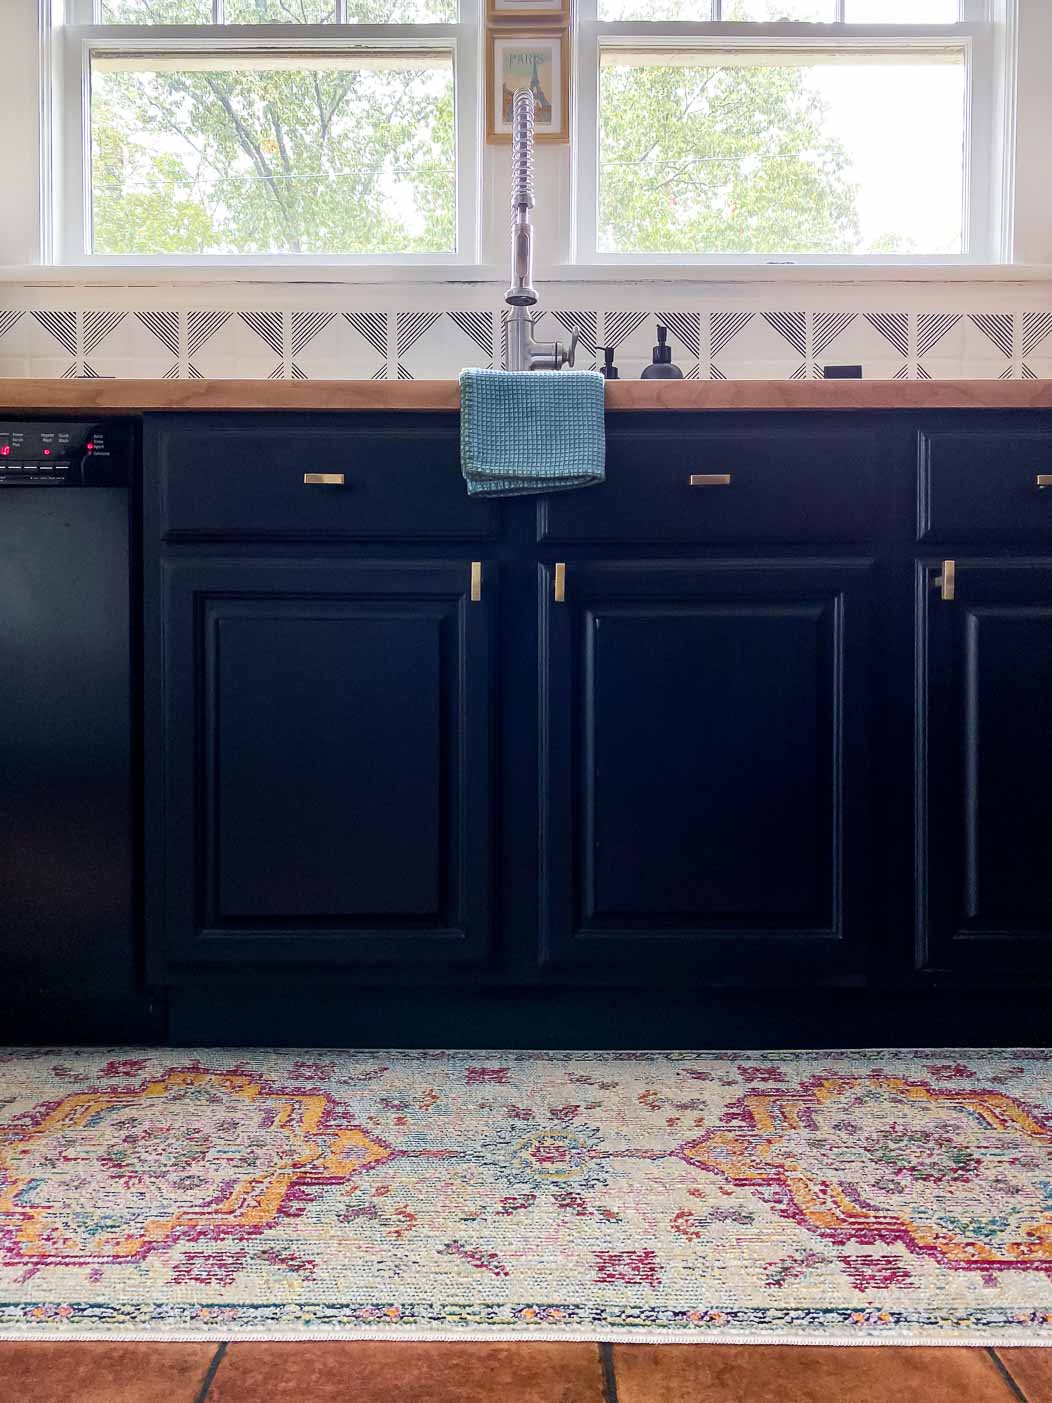 How to Choose a Kitchen Rug that Matches Your Cabinets